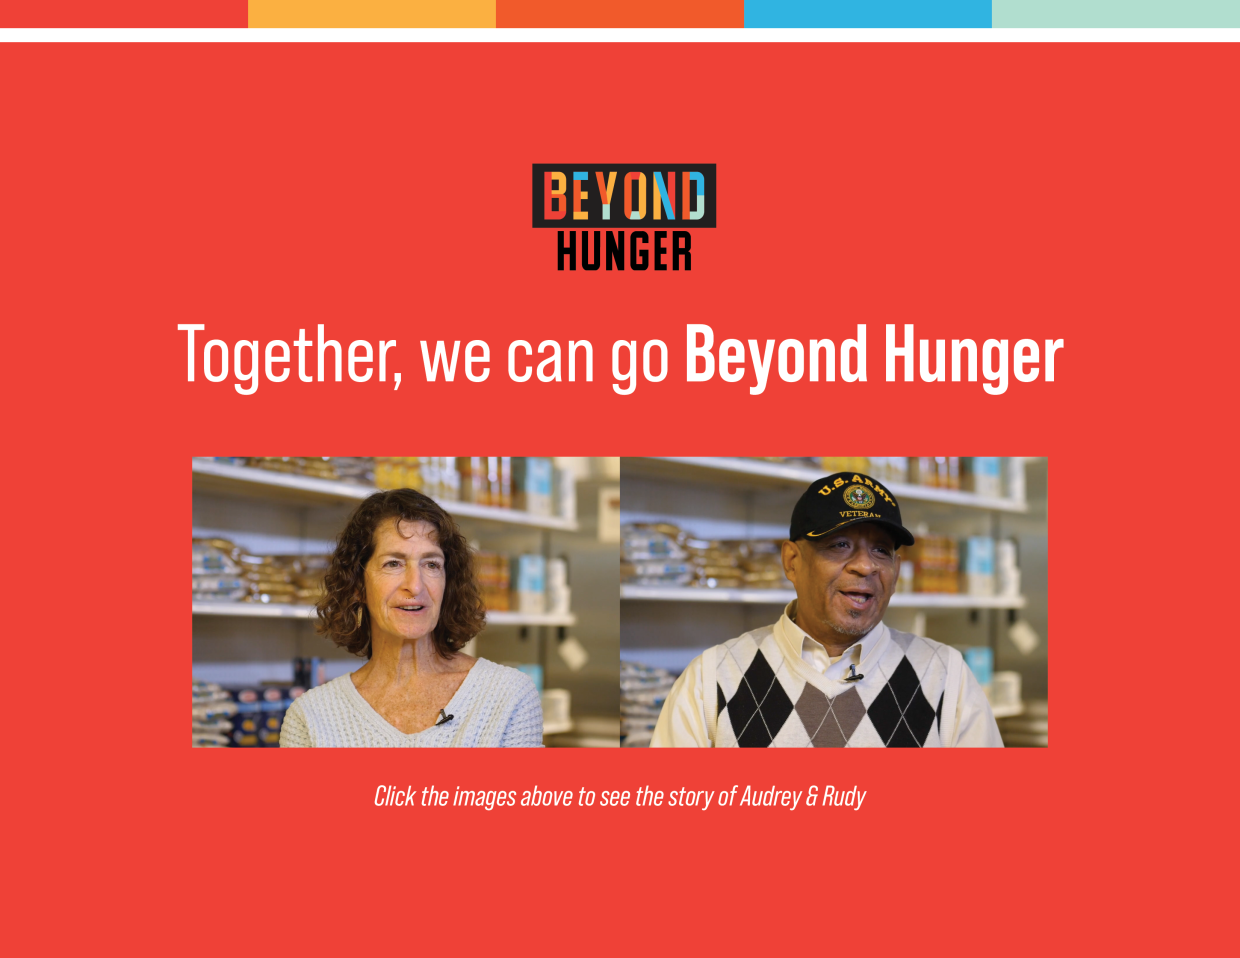 Together, we can go beyond hunger